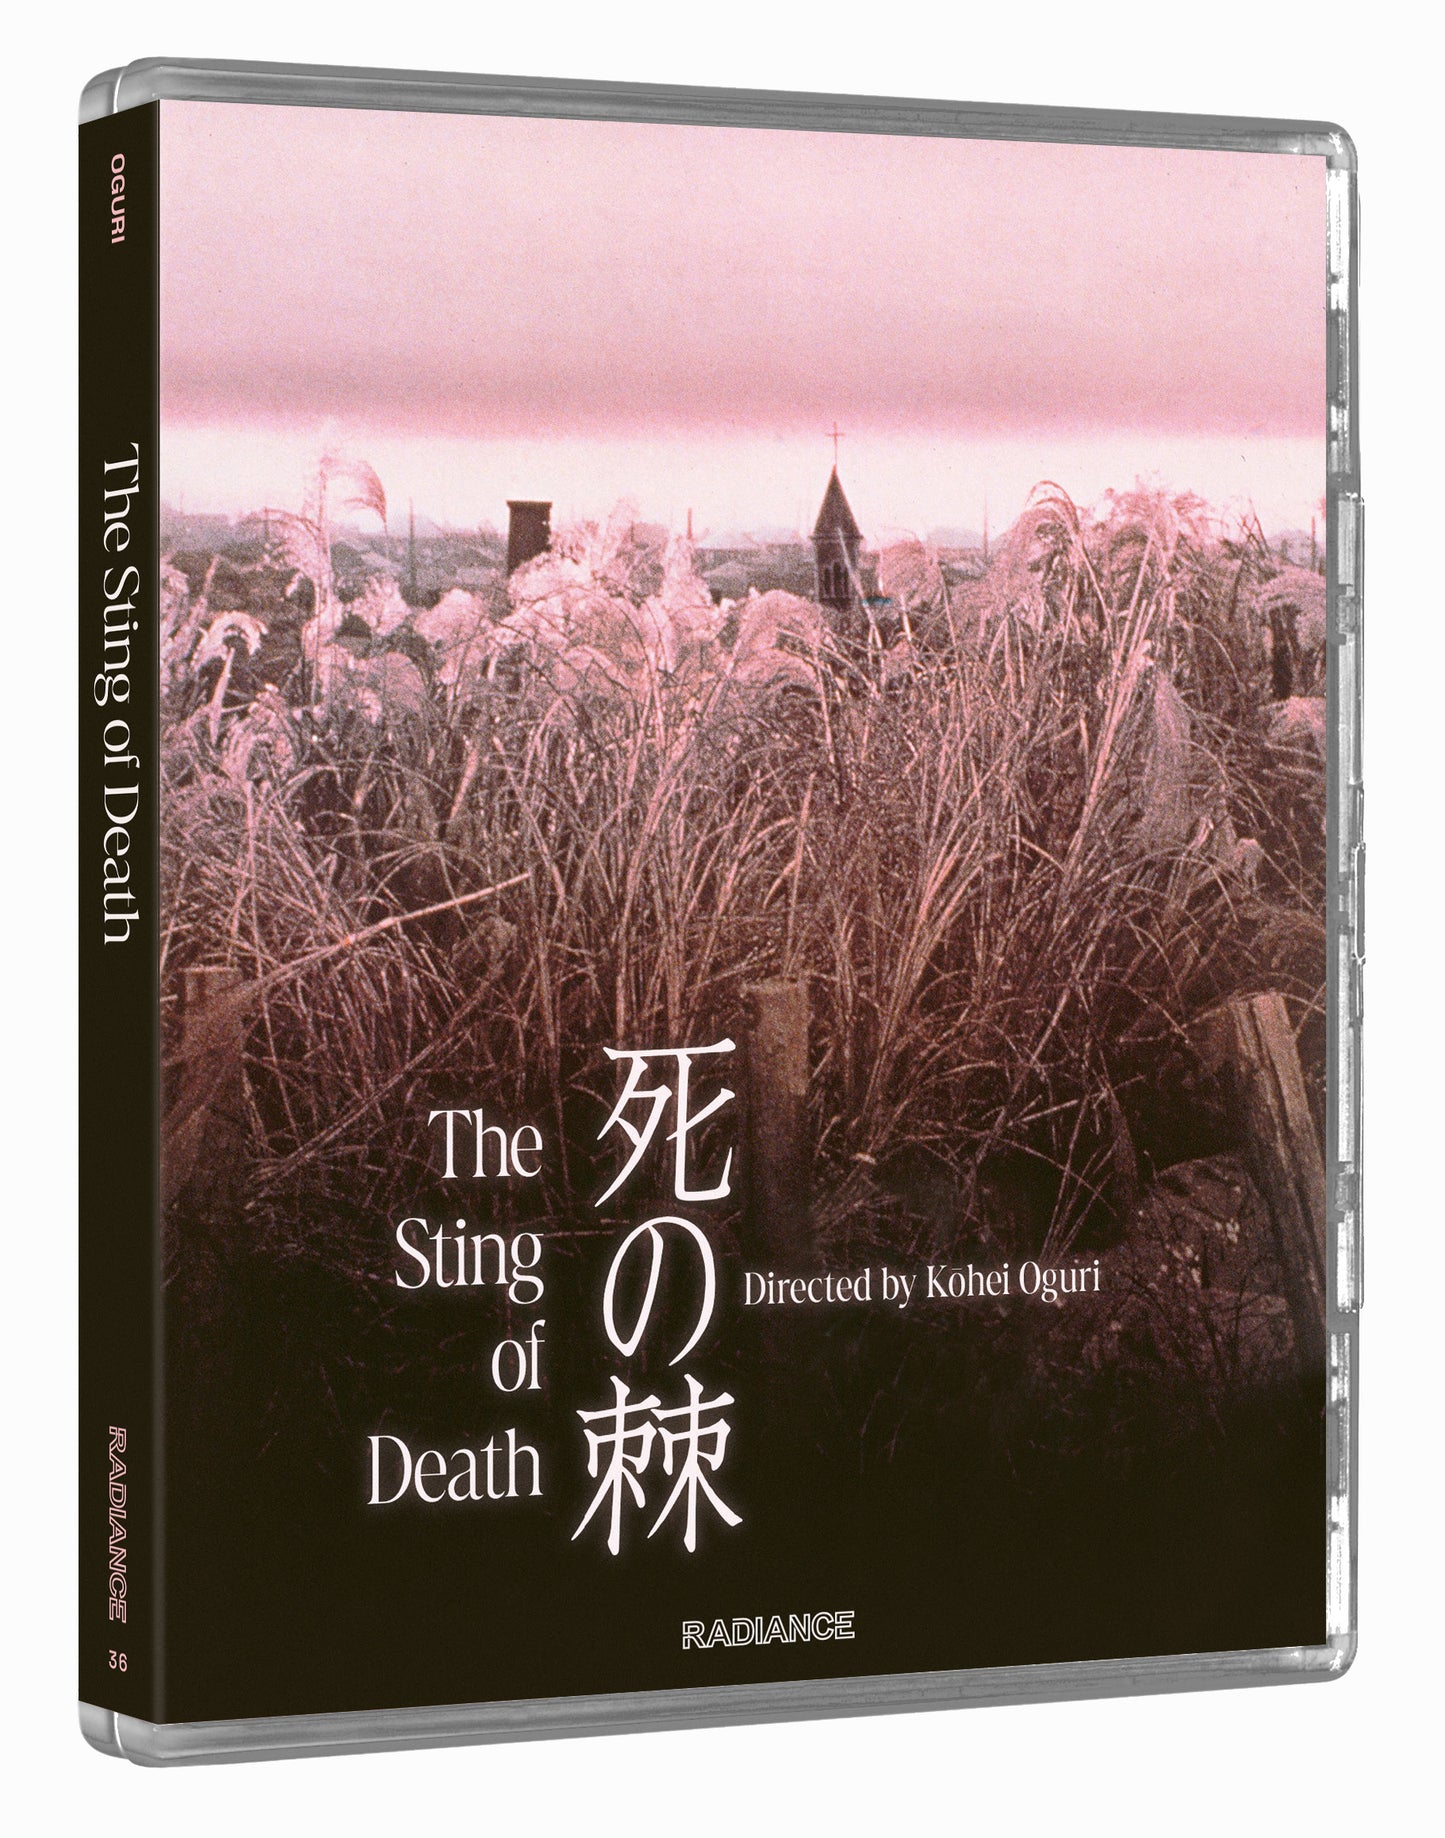 The Sting of Death Limited Edition Blu-ray (Radiance U.S.)